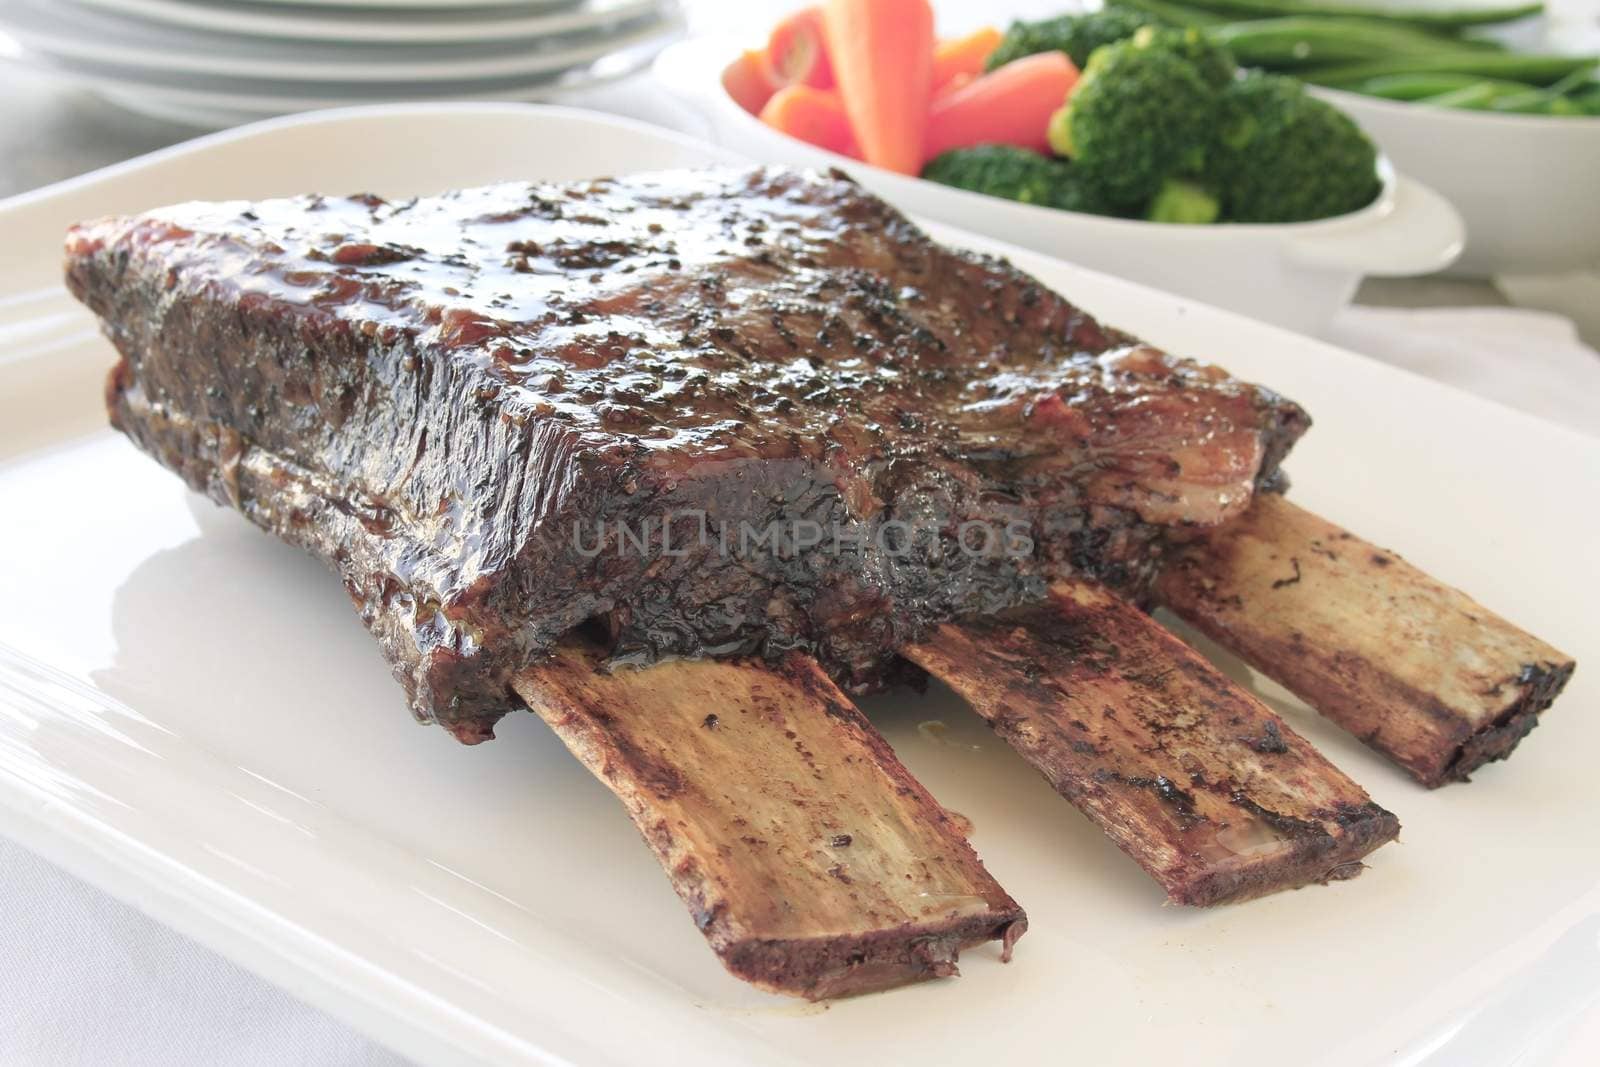 cooked beef rib